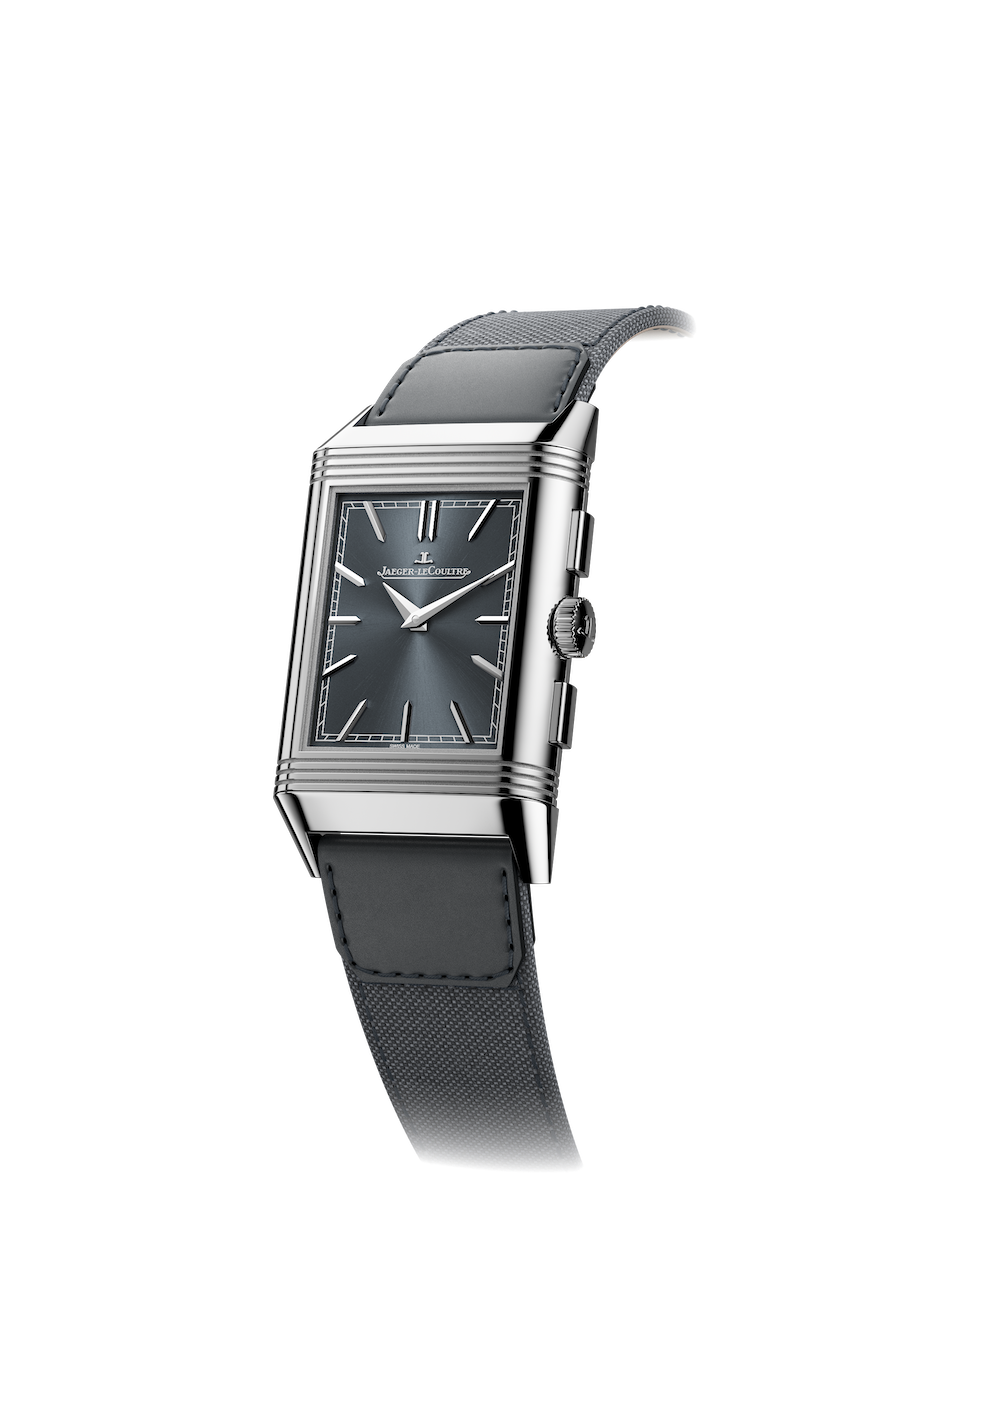 Jaeger-LeCoultre Reverso Tribute Chronograph unveiled at Watches & Wonders Geneva 2023.